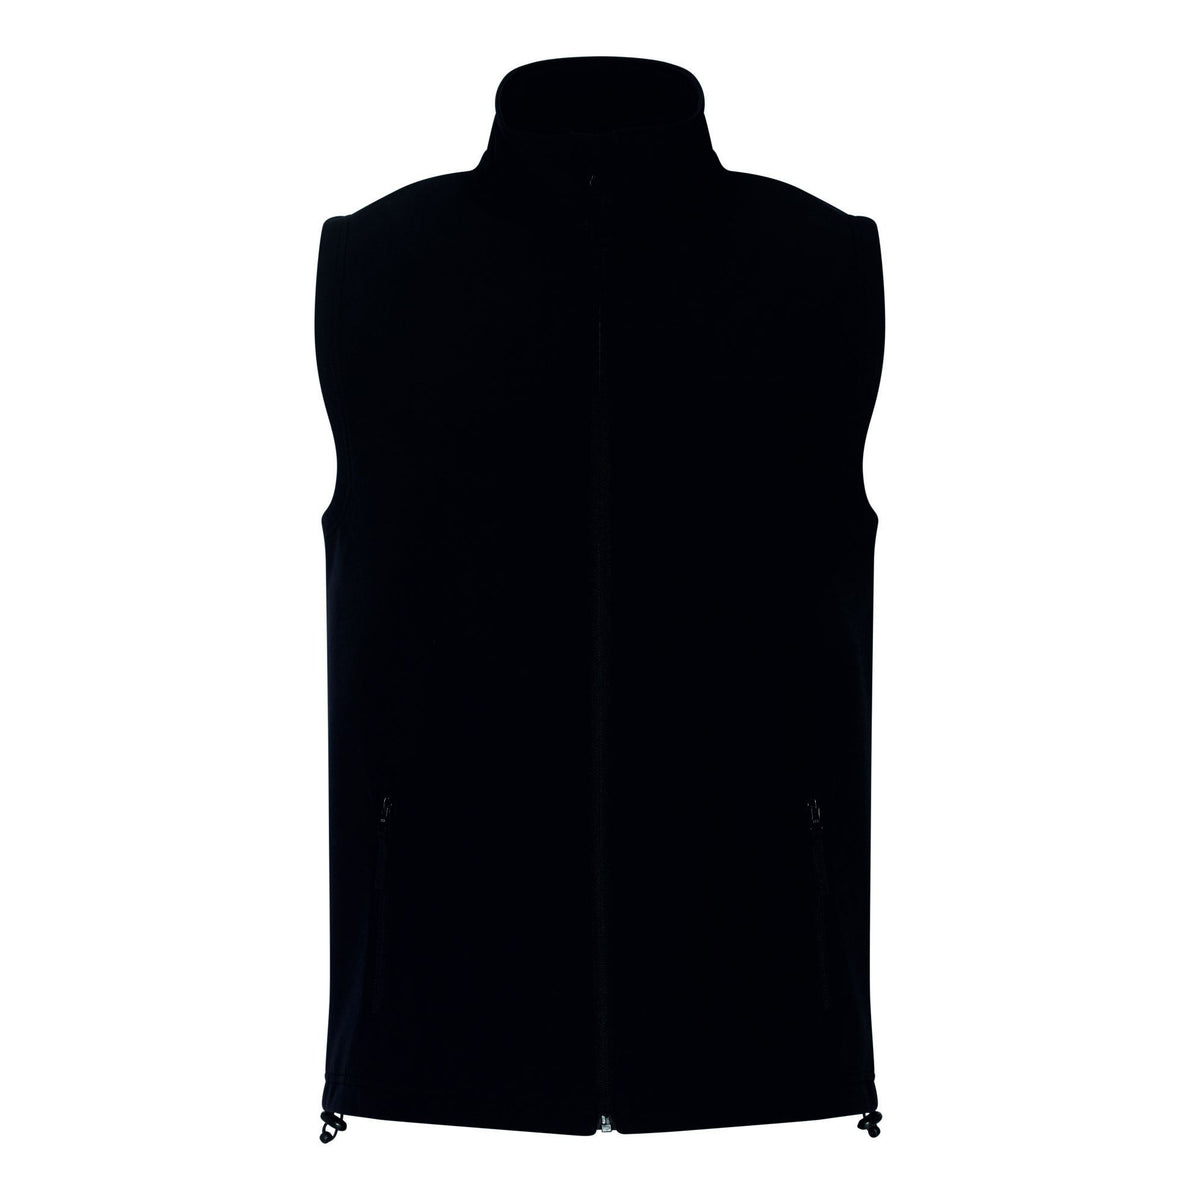 2 layer Soft Shell Gilet